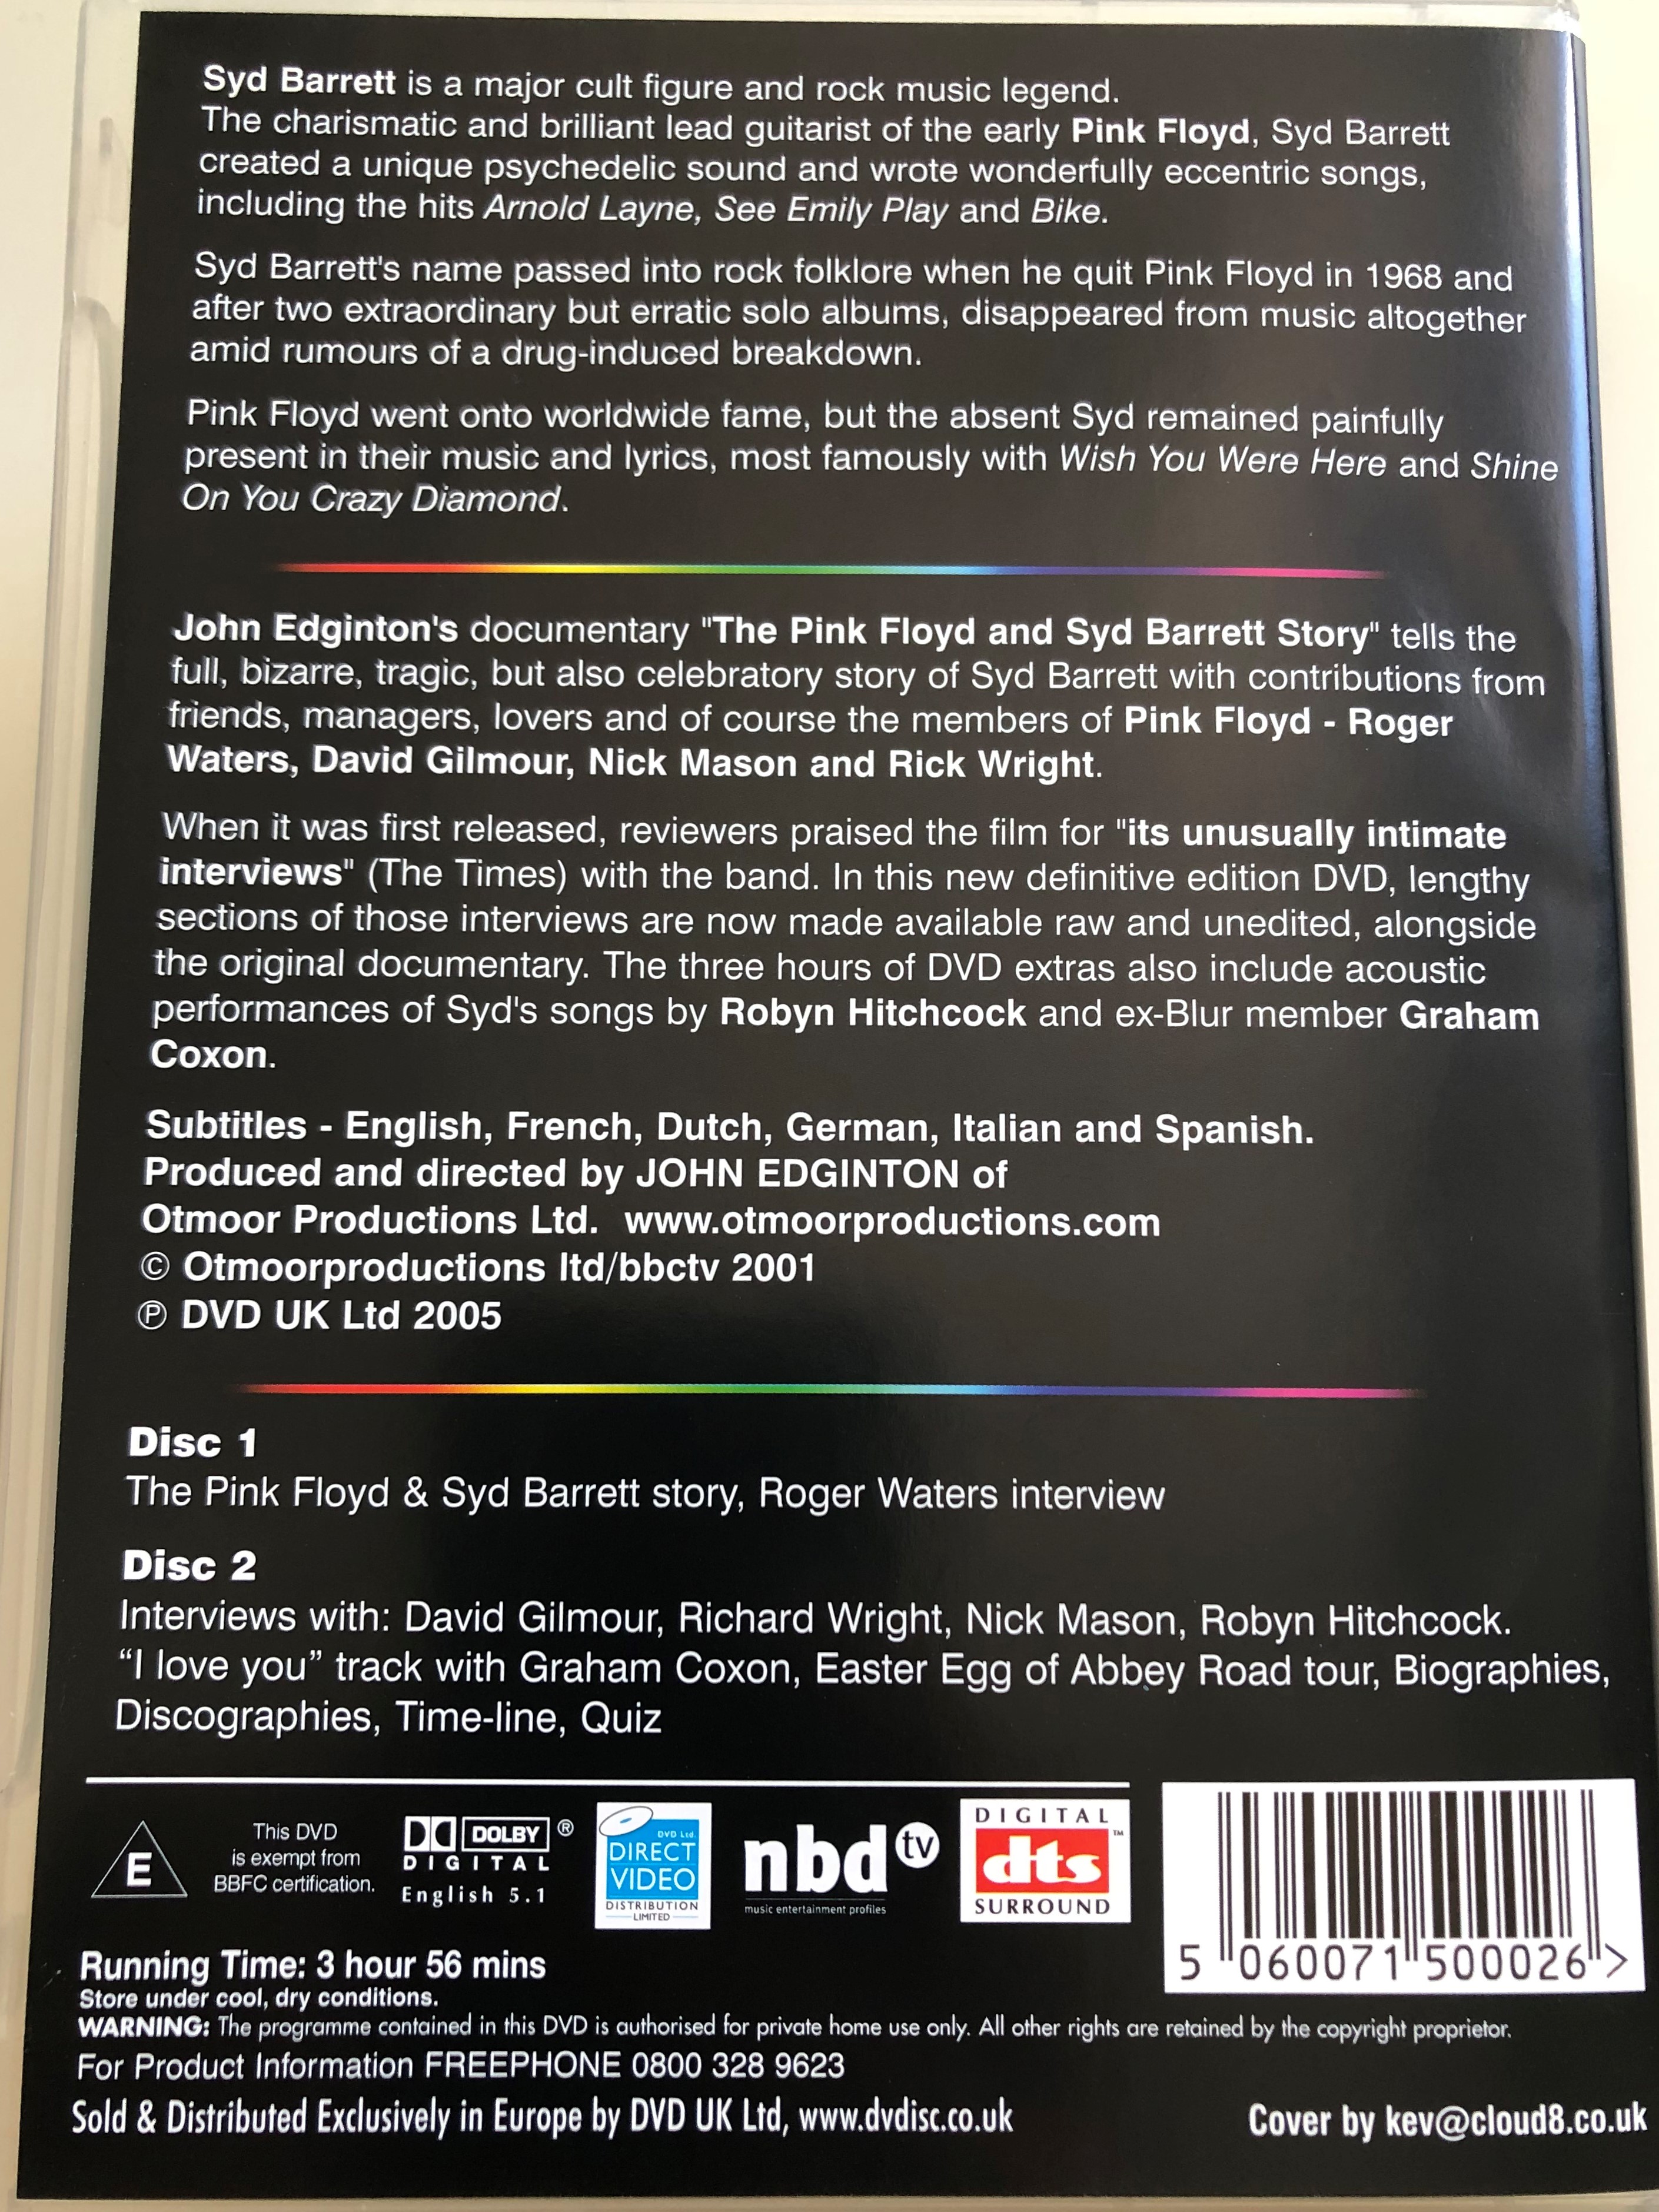 The Pink Floyd & Syd Barrett Story 2 DVD Set 2001 / The Definitive Edition  / Roger Waters interview, David Gilmour, Nick Mason / Directed by John  Edginton - bibleinmylanguage